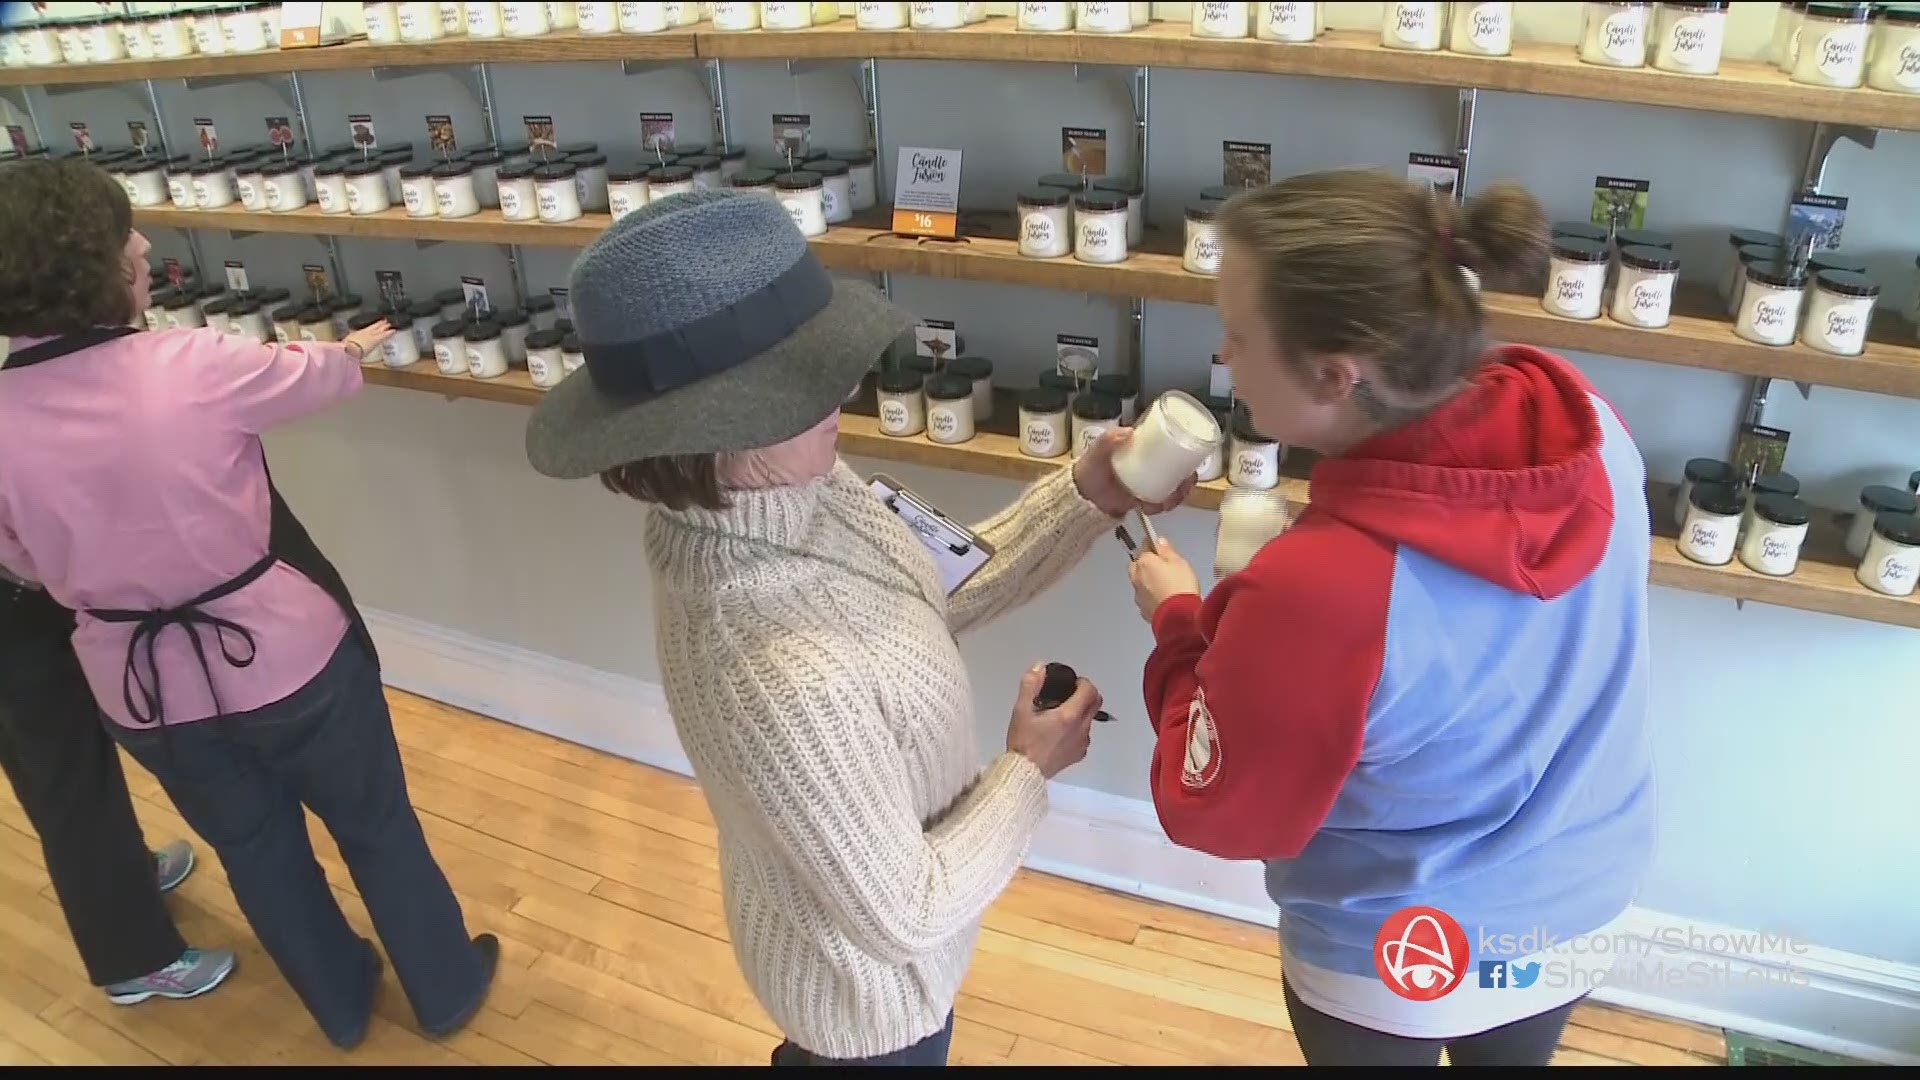 There's a new studio in town where you can combine aromas like maple syrup, cake batter and hot cocoa to make your own personal candle. Jimmy V. stopped by Candle Fusion to see how they're lighting up the Central West End.